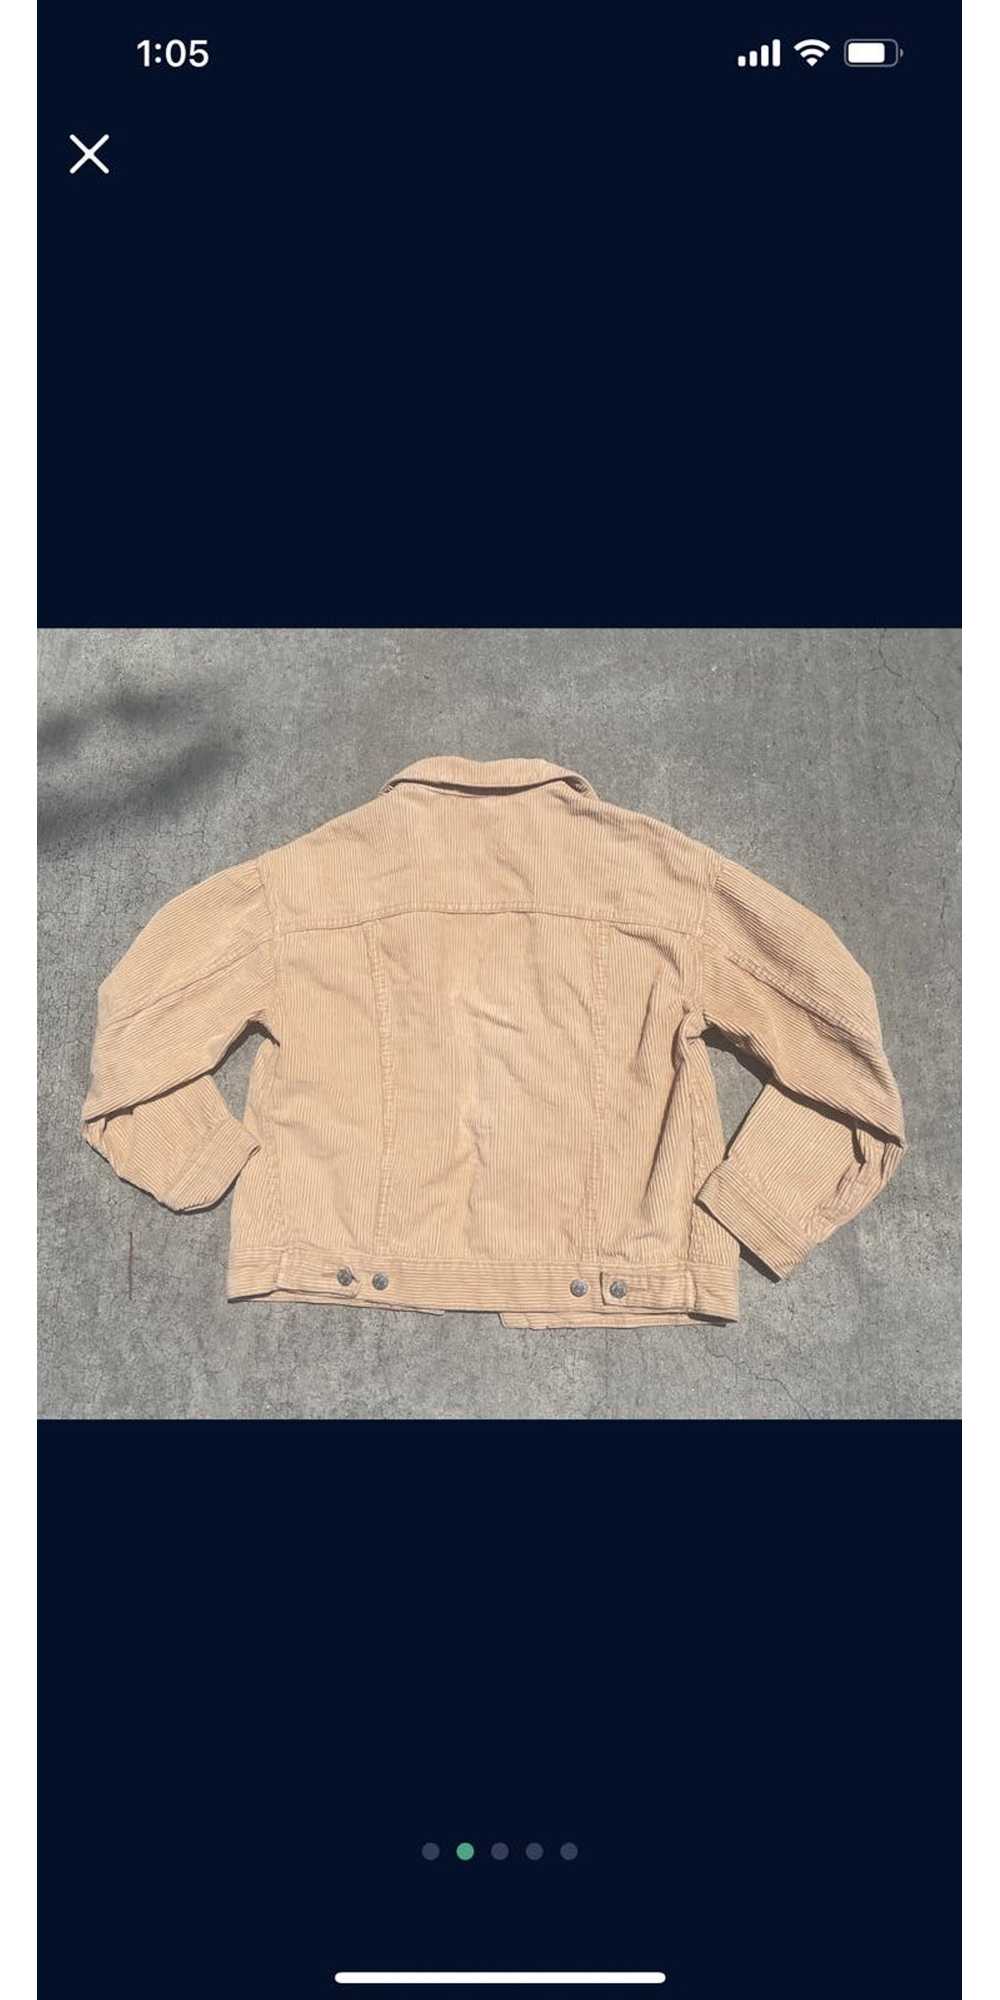 Bdg Corduroy BDG Urban Outfitters Jacket - image 2